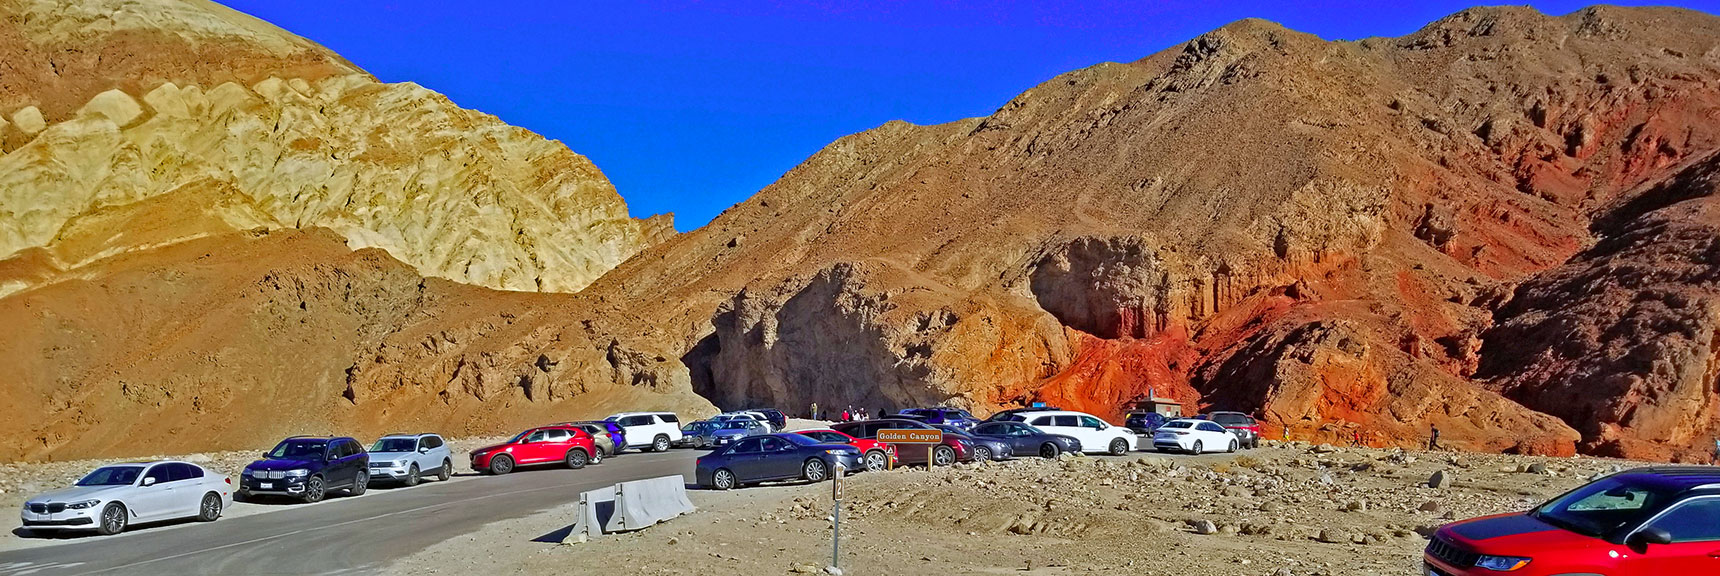 Arrival at Golden Canyon Entrance and Trailhead. Much Busier Later in the Day. | Golden Canyon to Zabriskie Point | Death Valley National Park, California